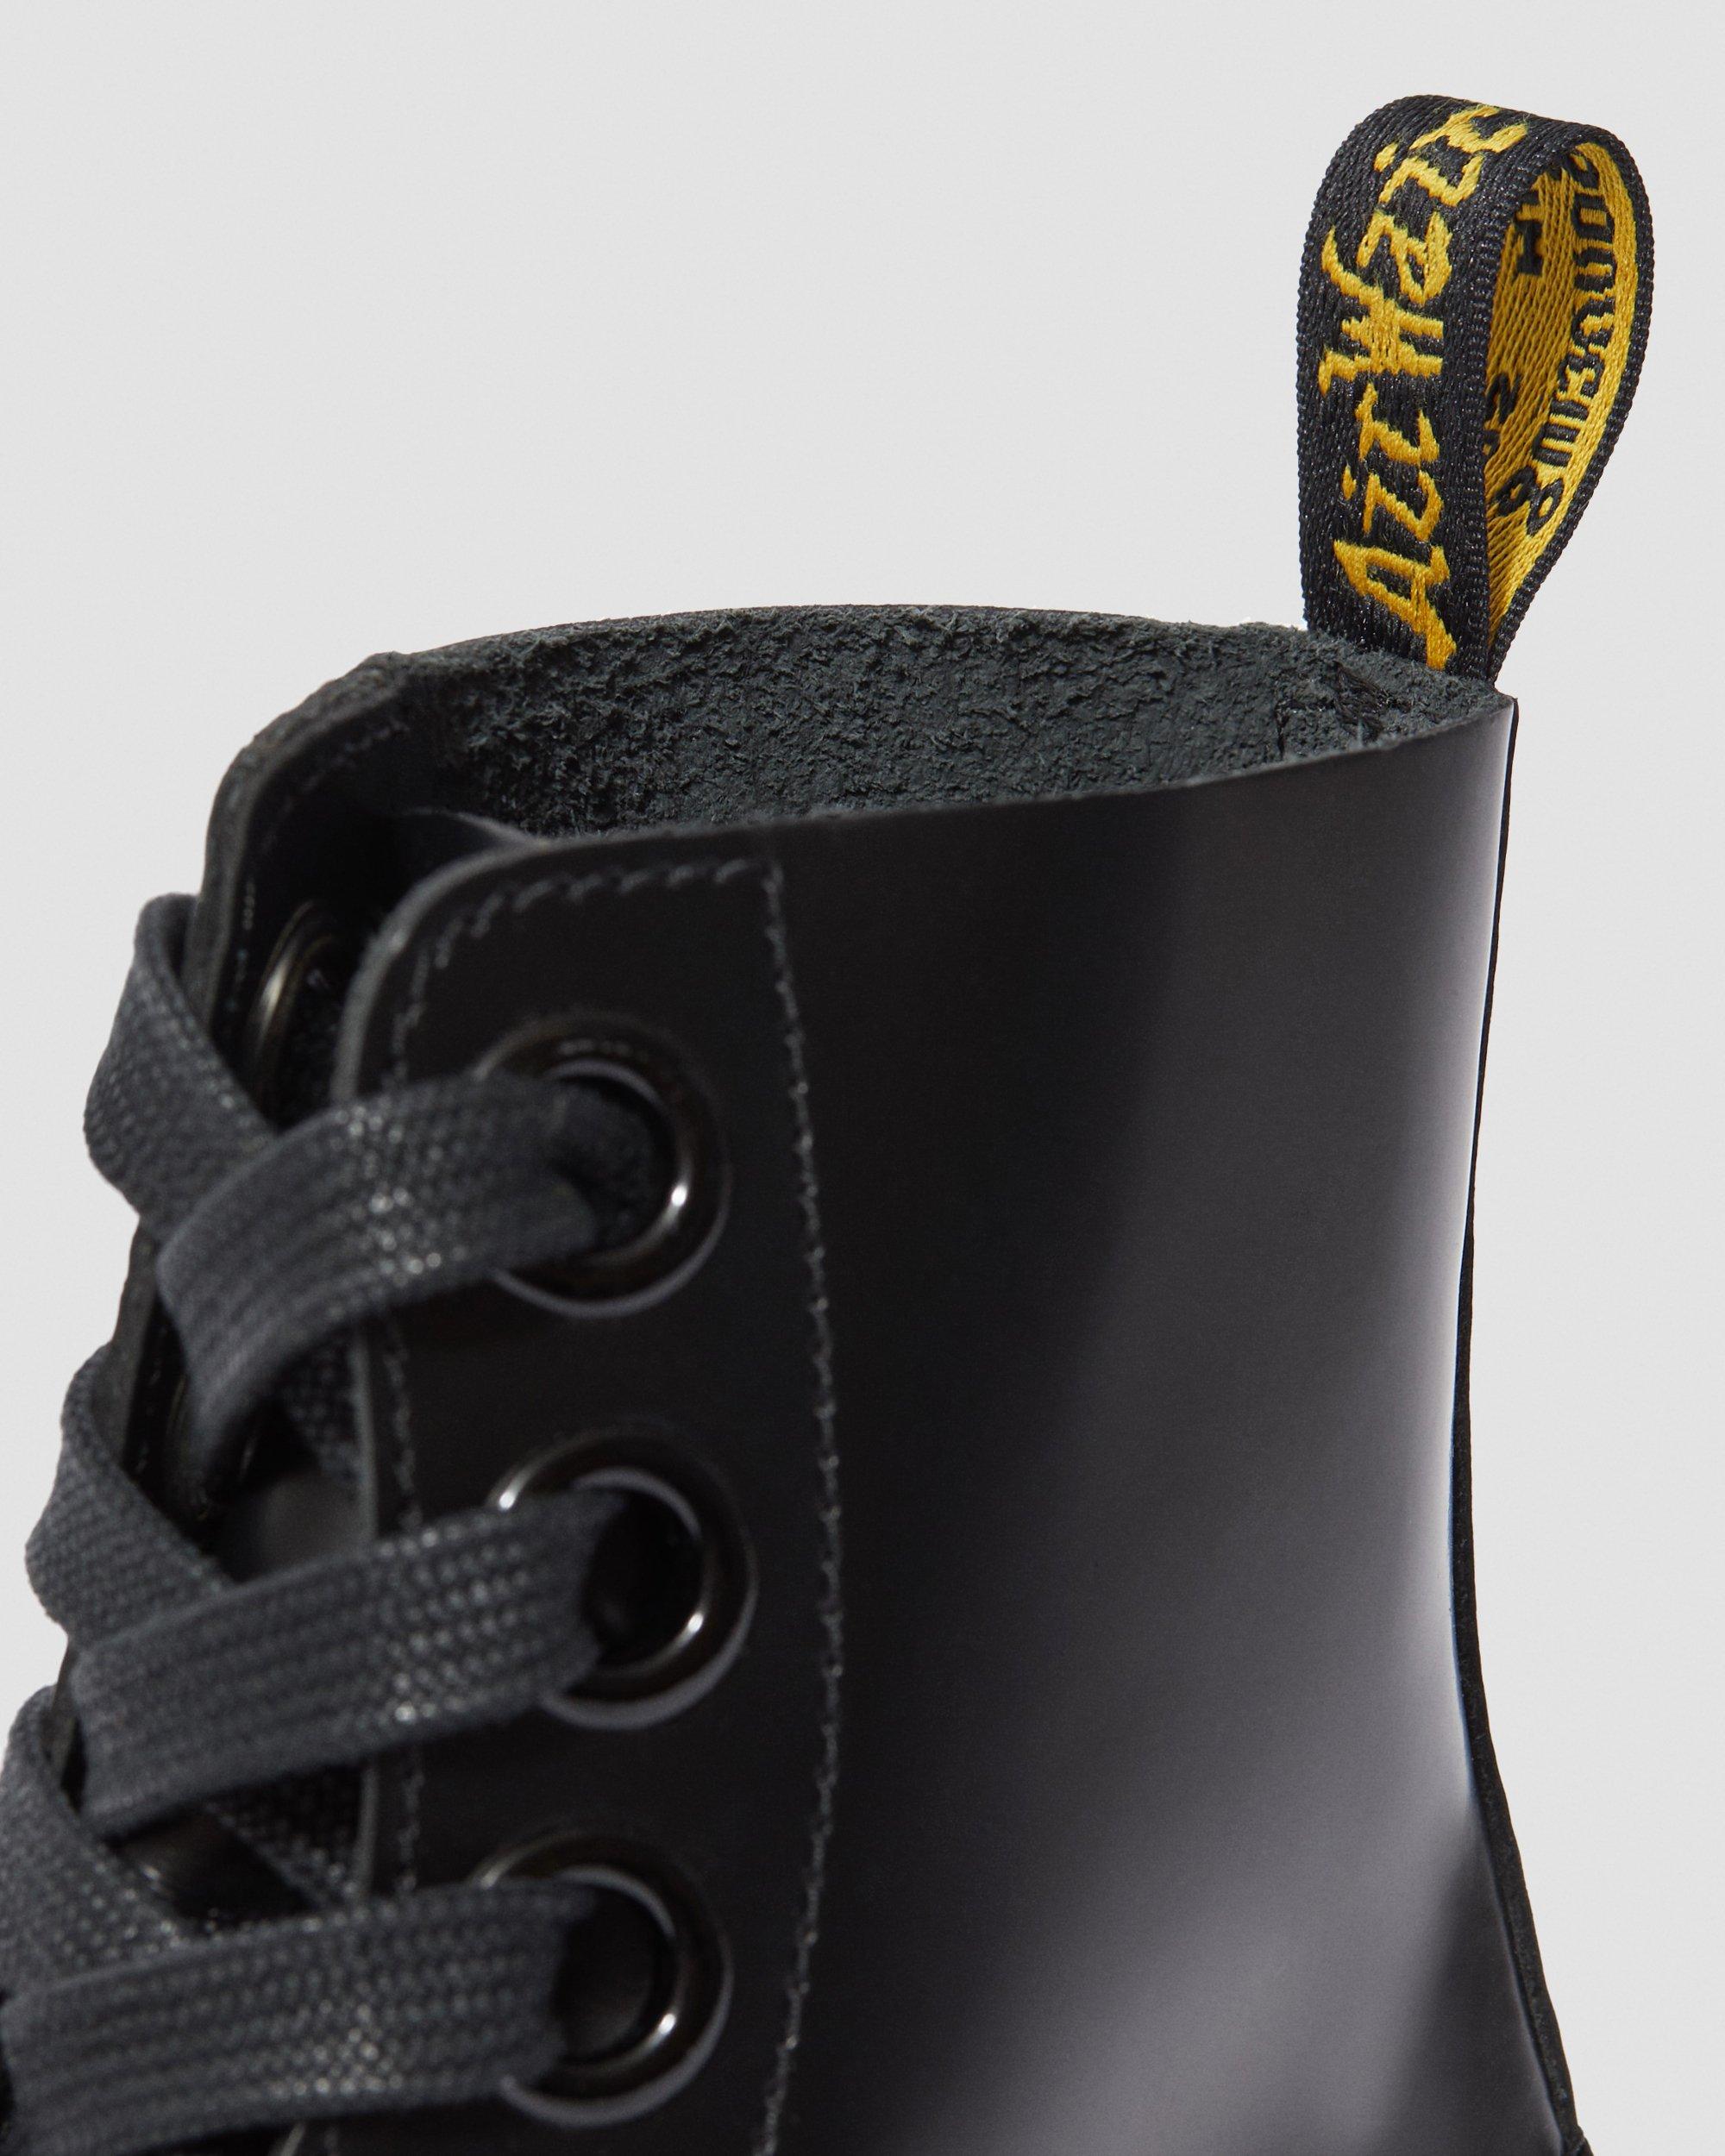 DR MARTENS Molly Women's Leather Platform Boots